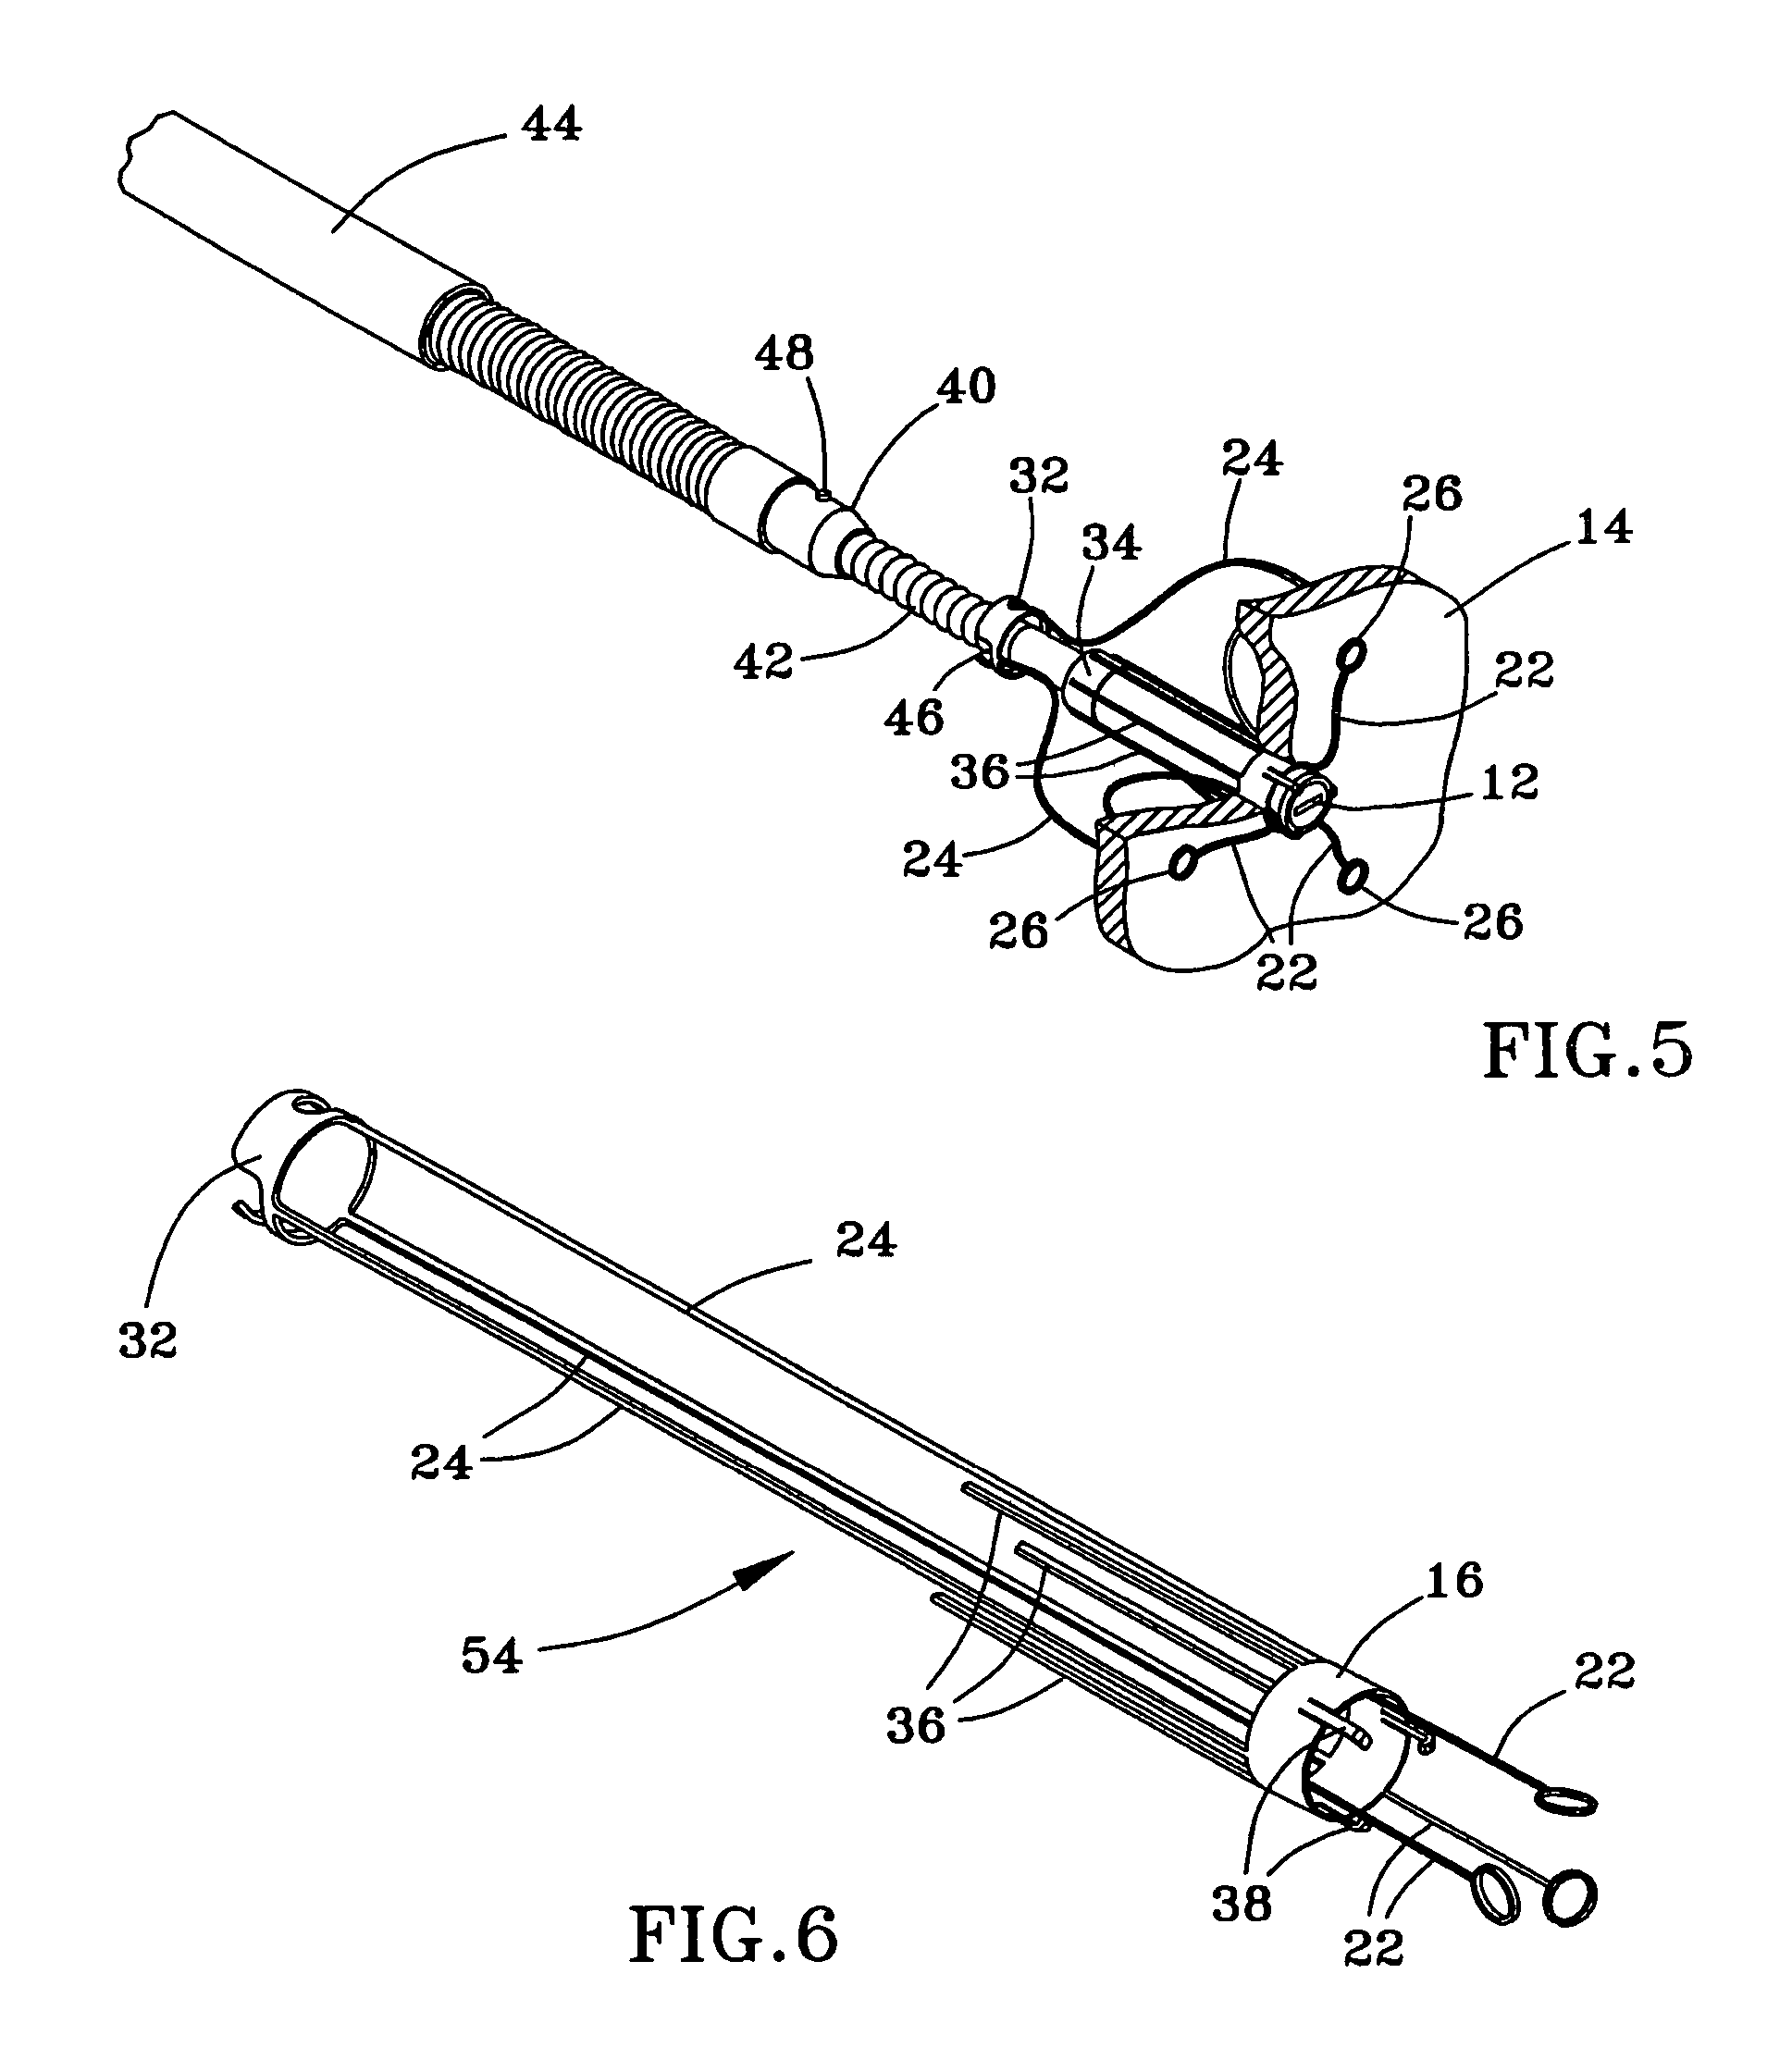 Anchor for medical implant placement and method of manufacture